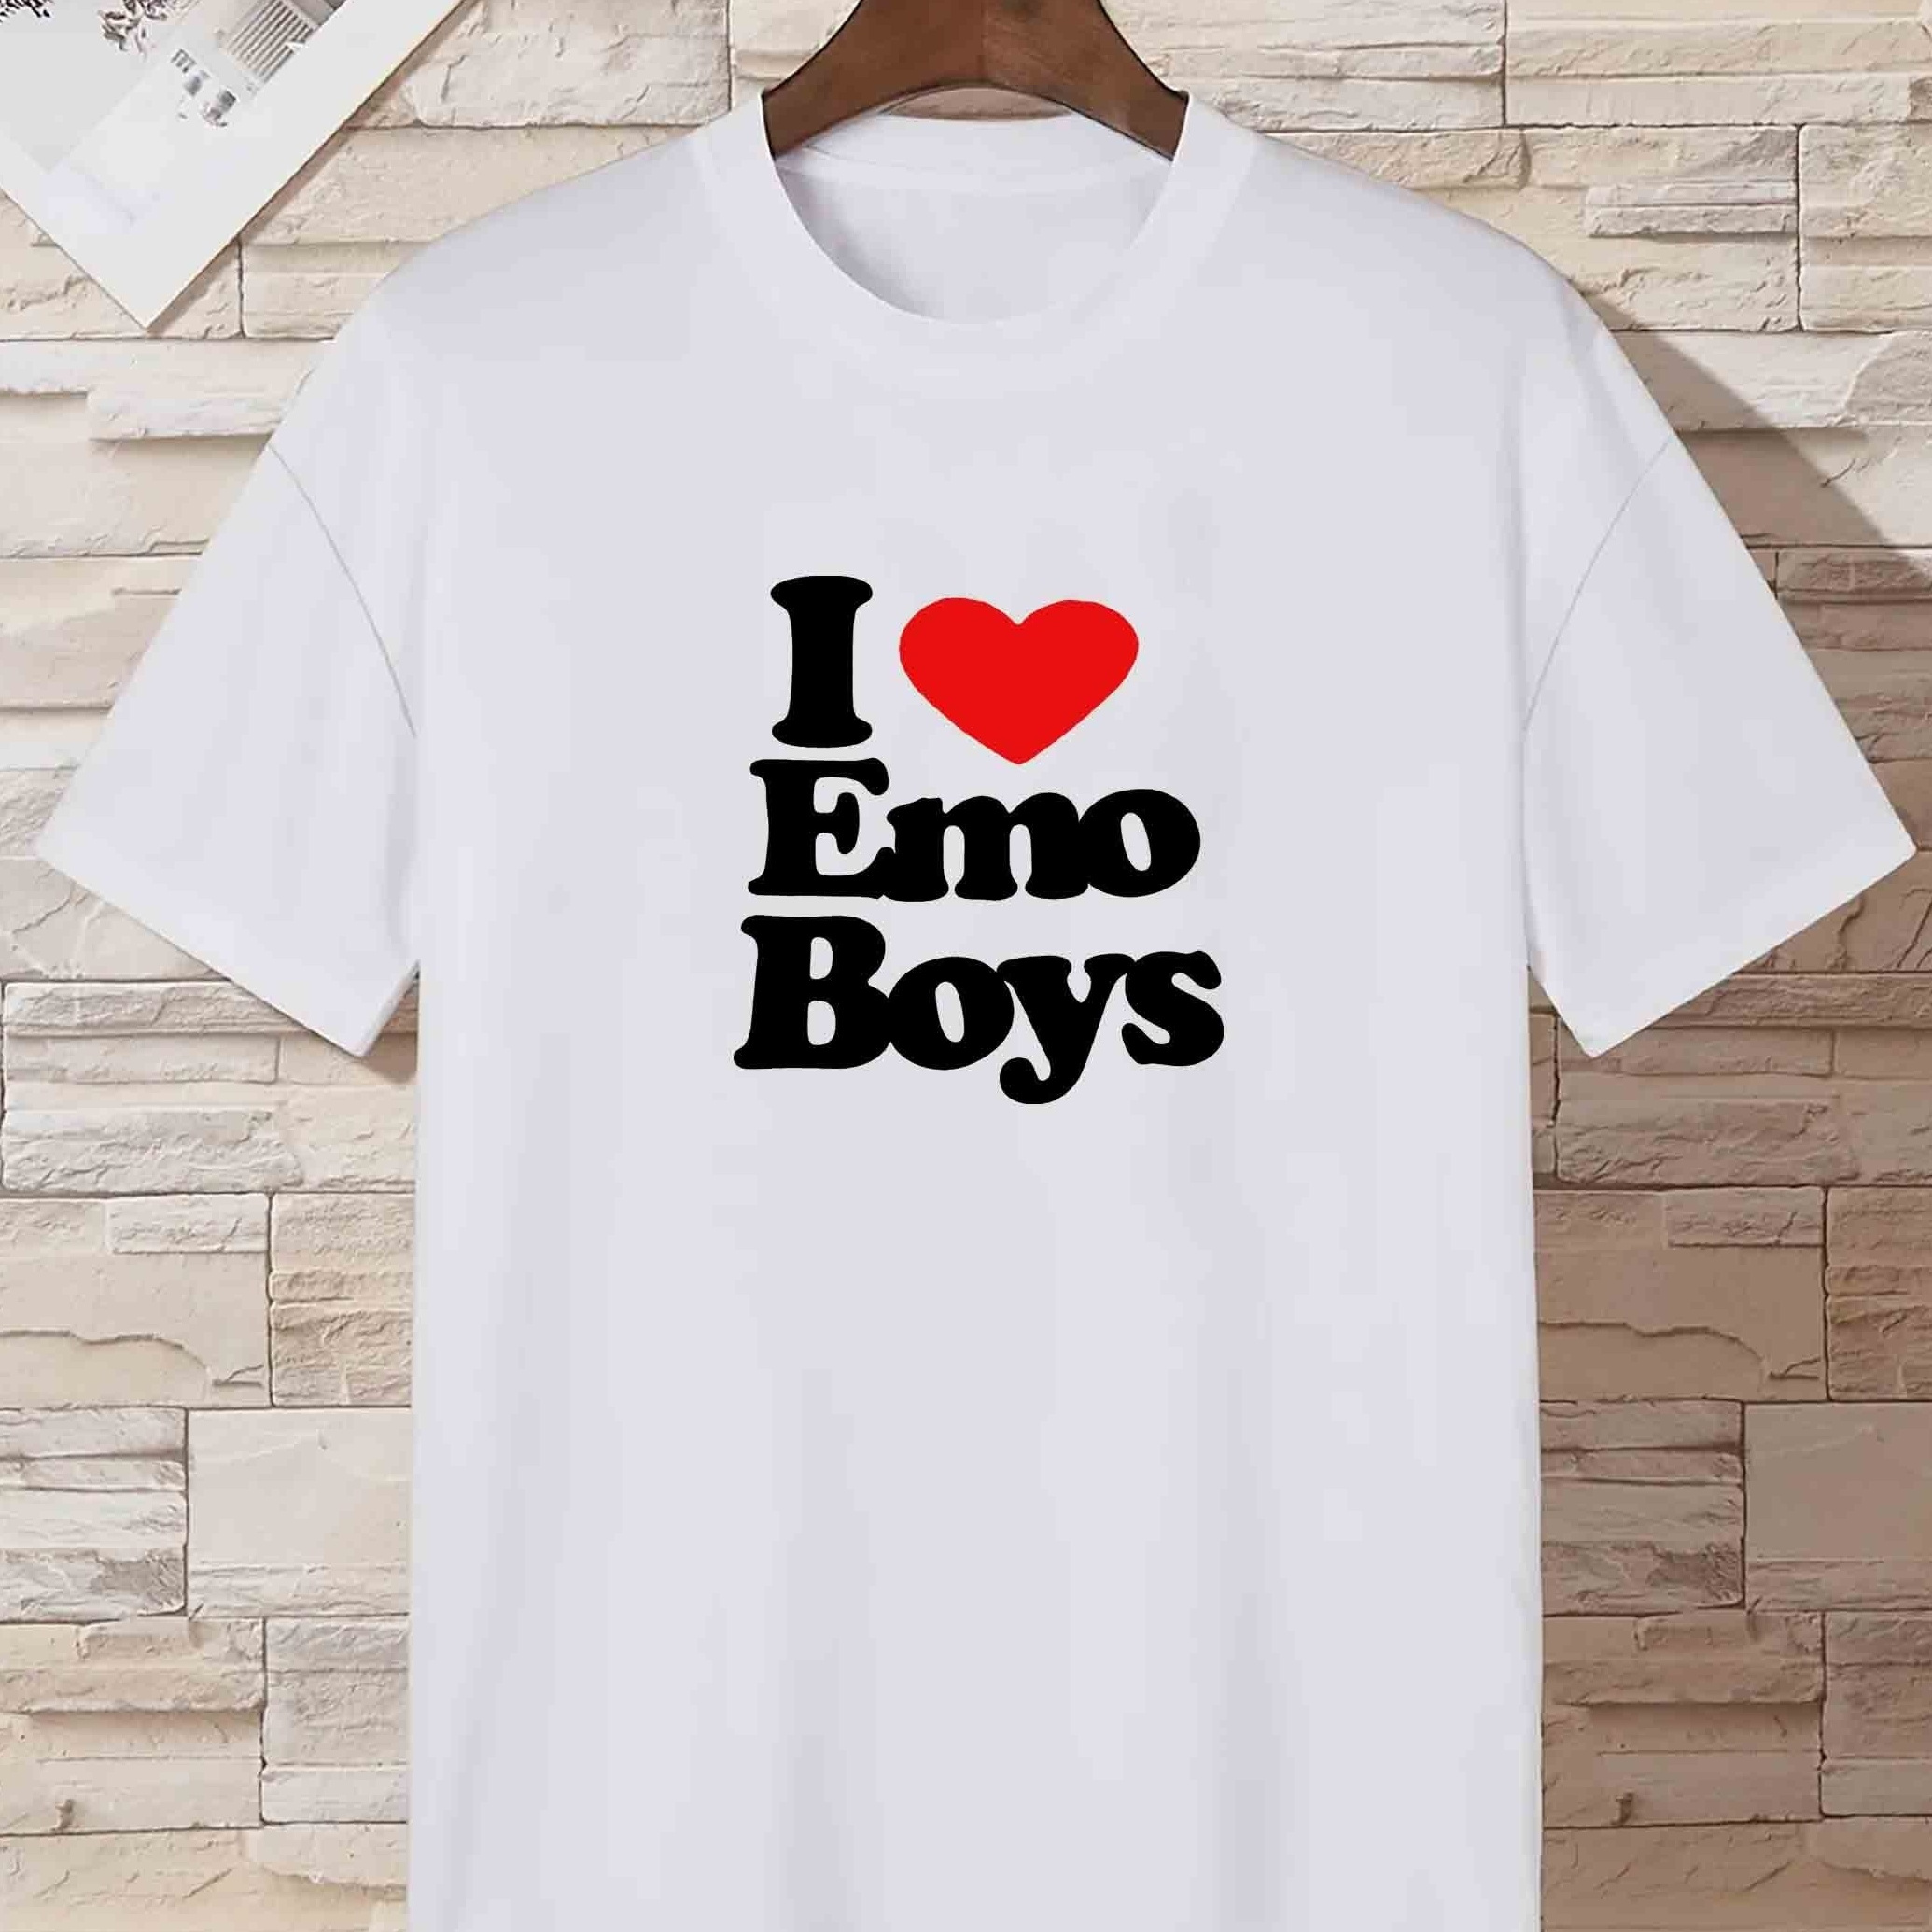 

'i Love Emo Boys' Print T Shirt, Tees For Men, Casual Short Sleeve Tshirt For Summer Spring Fall, Tops As Gifts, 1 Pc, 100% Cotton T-shirt